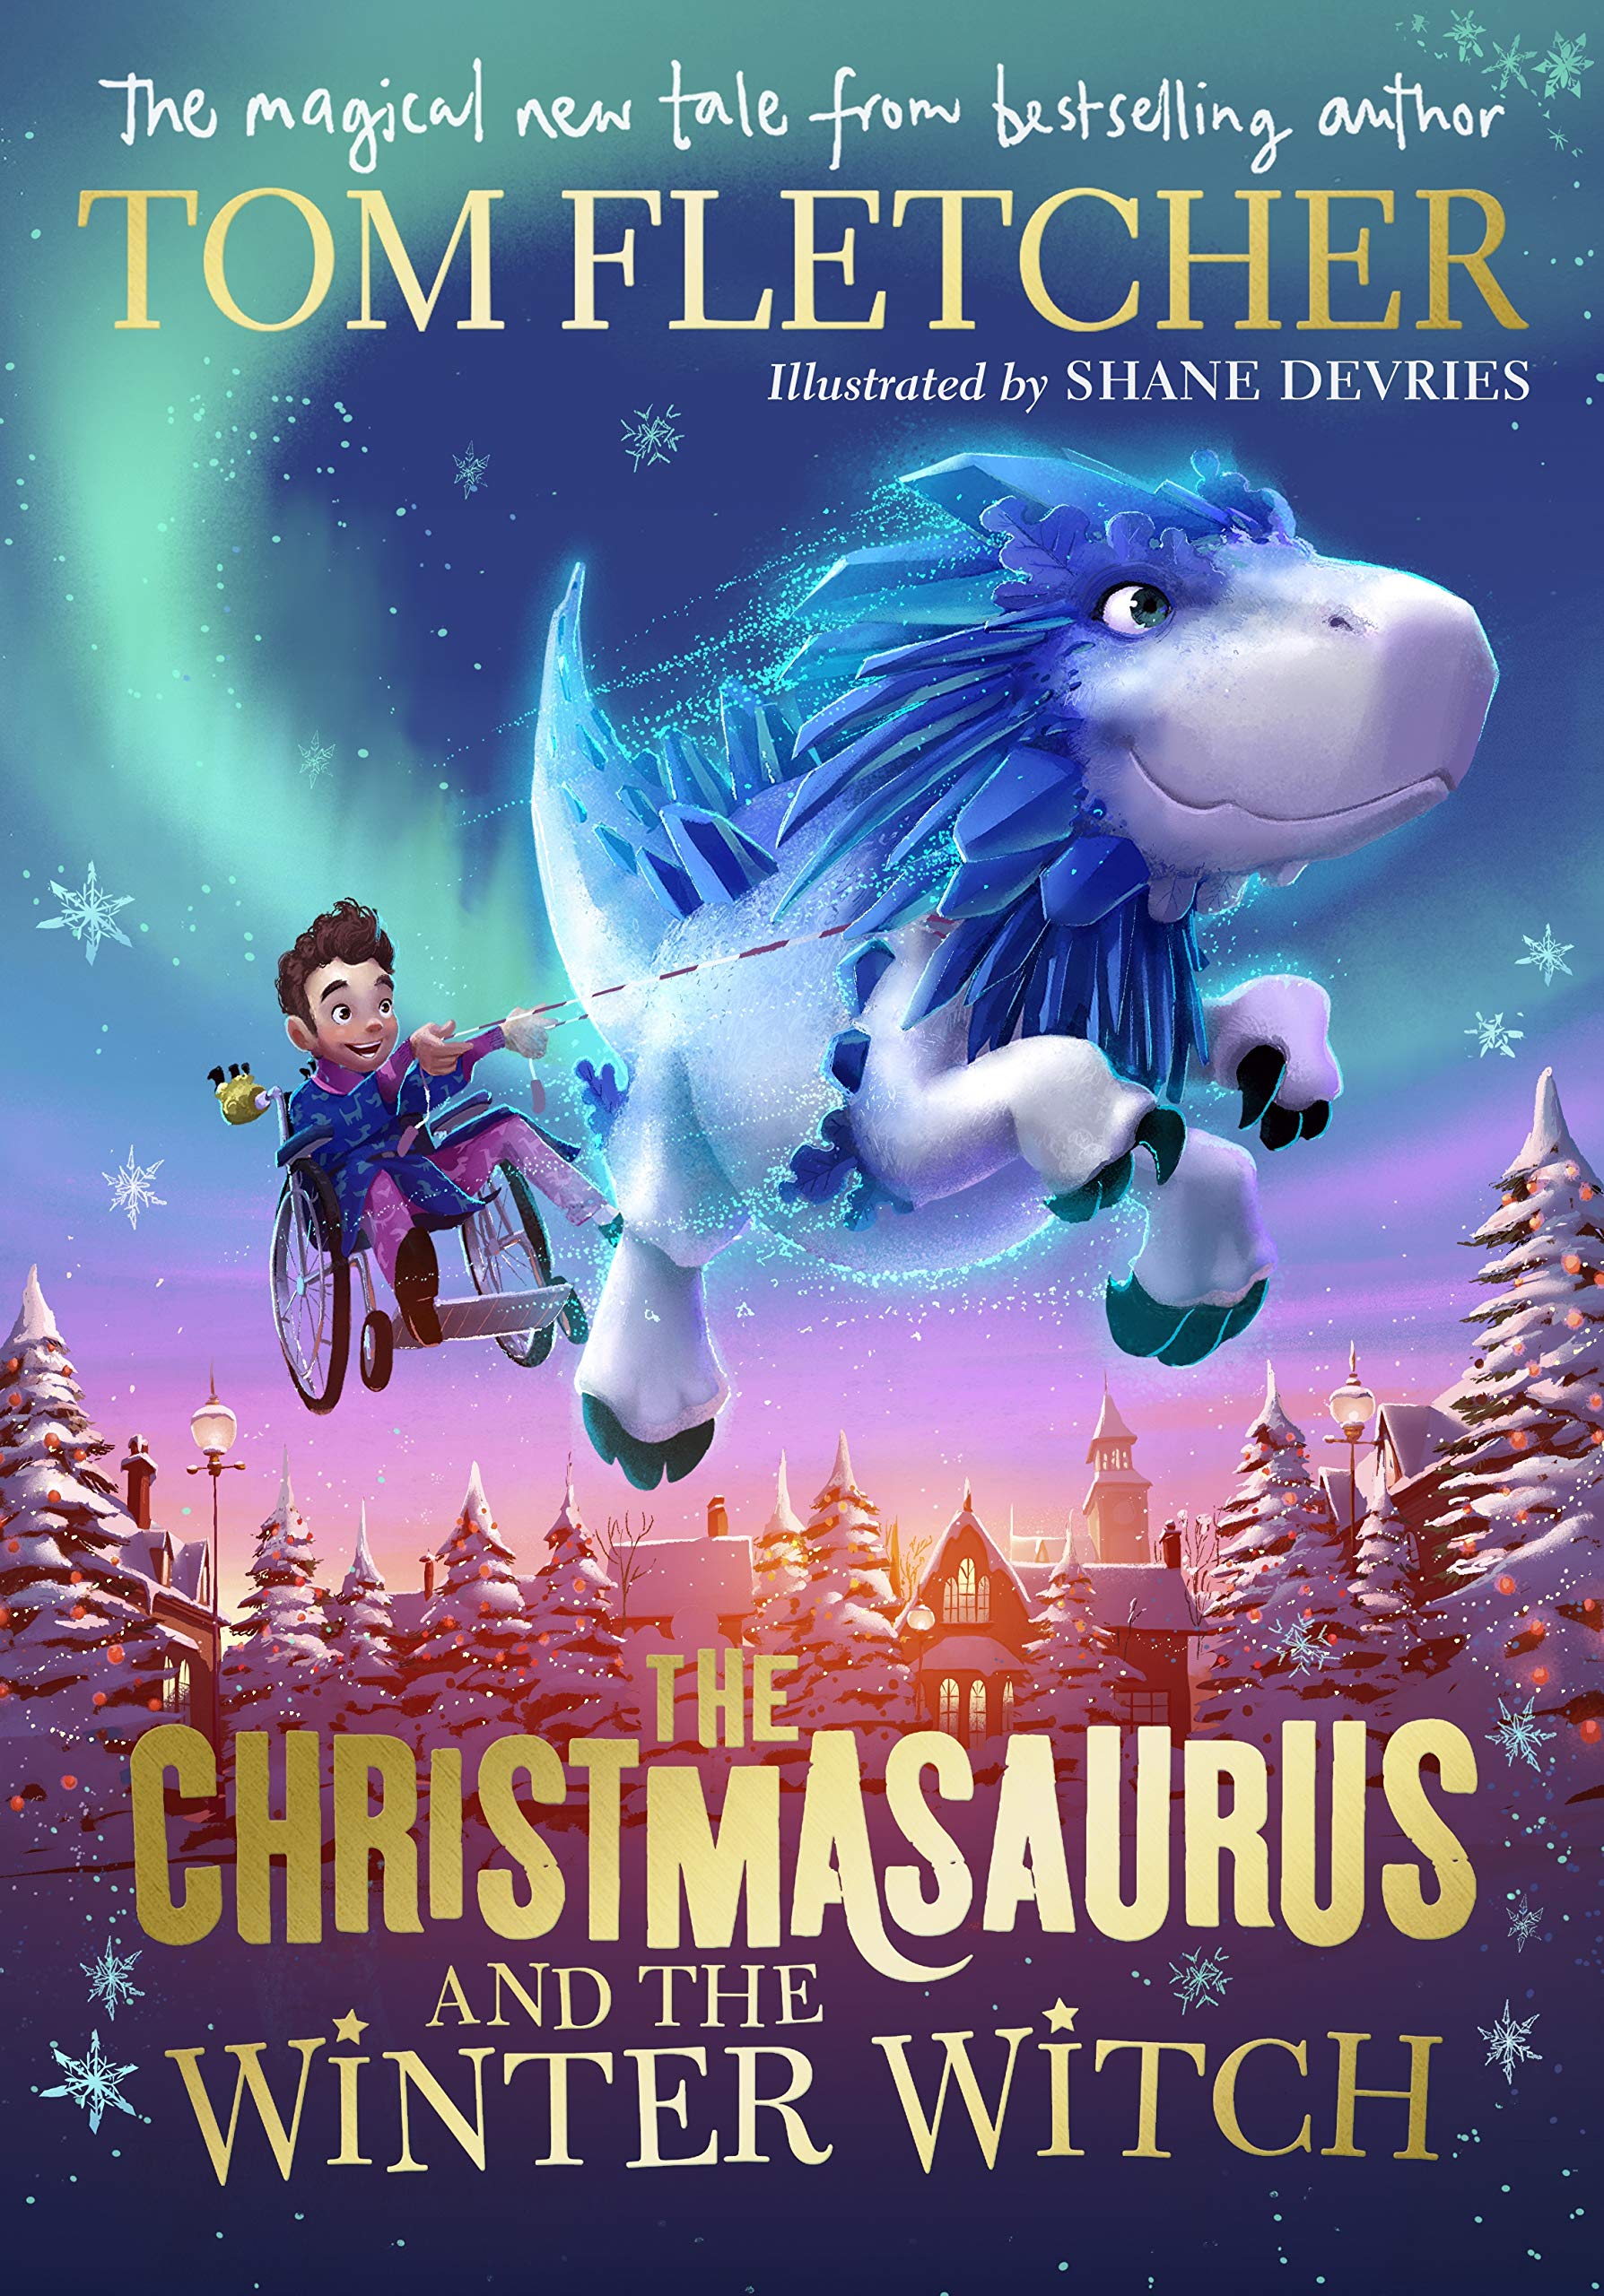 When Will The Christmasaurus and the Winter Witch Hardcover Come Out? Release Date